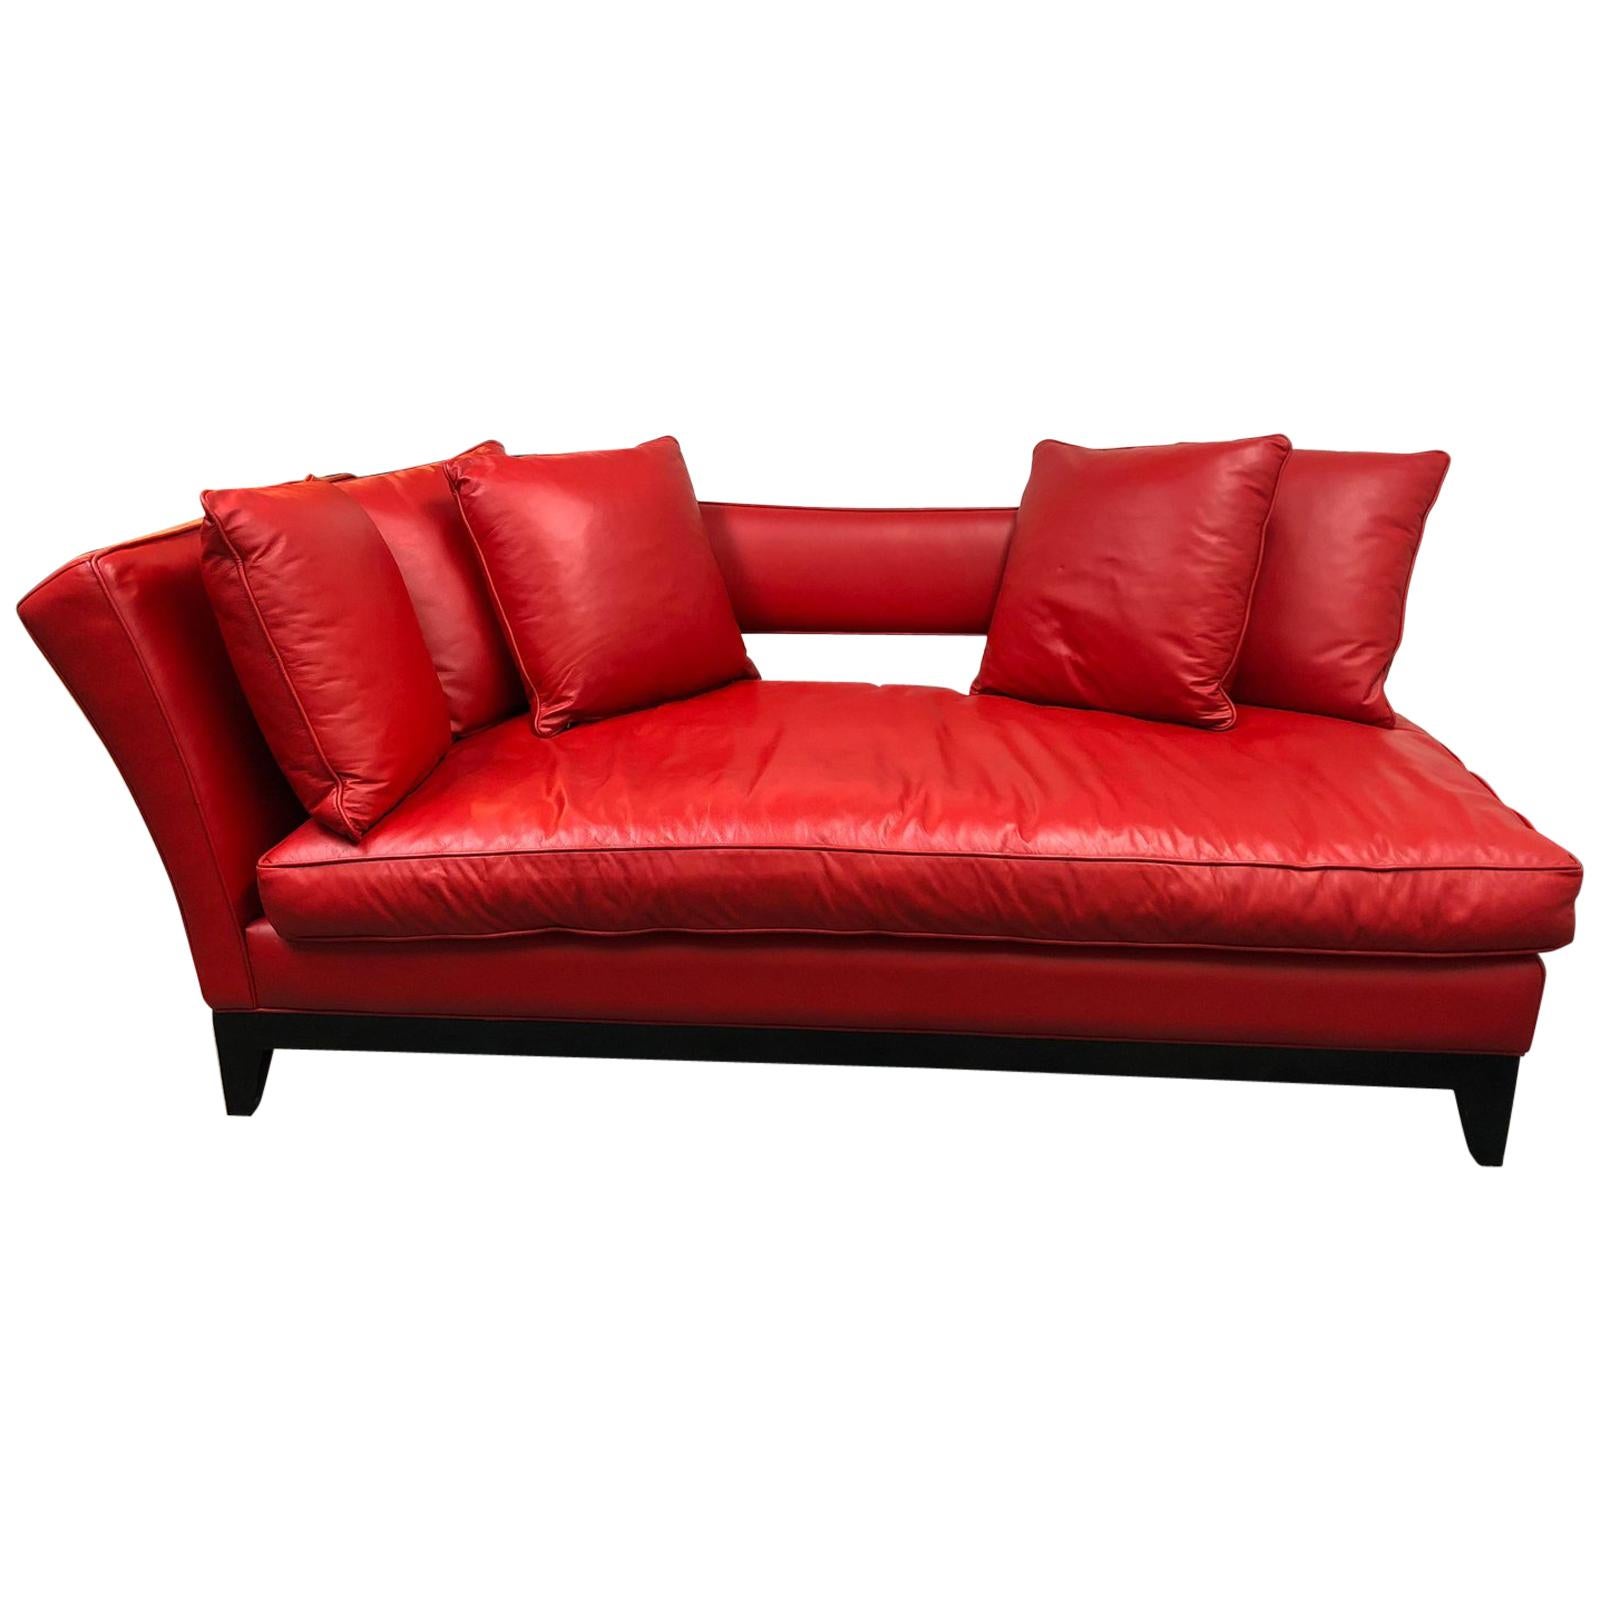 Custom Red Leather Chaise Sofa Lounge For Sale